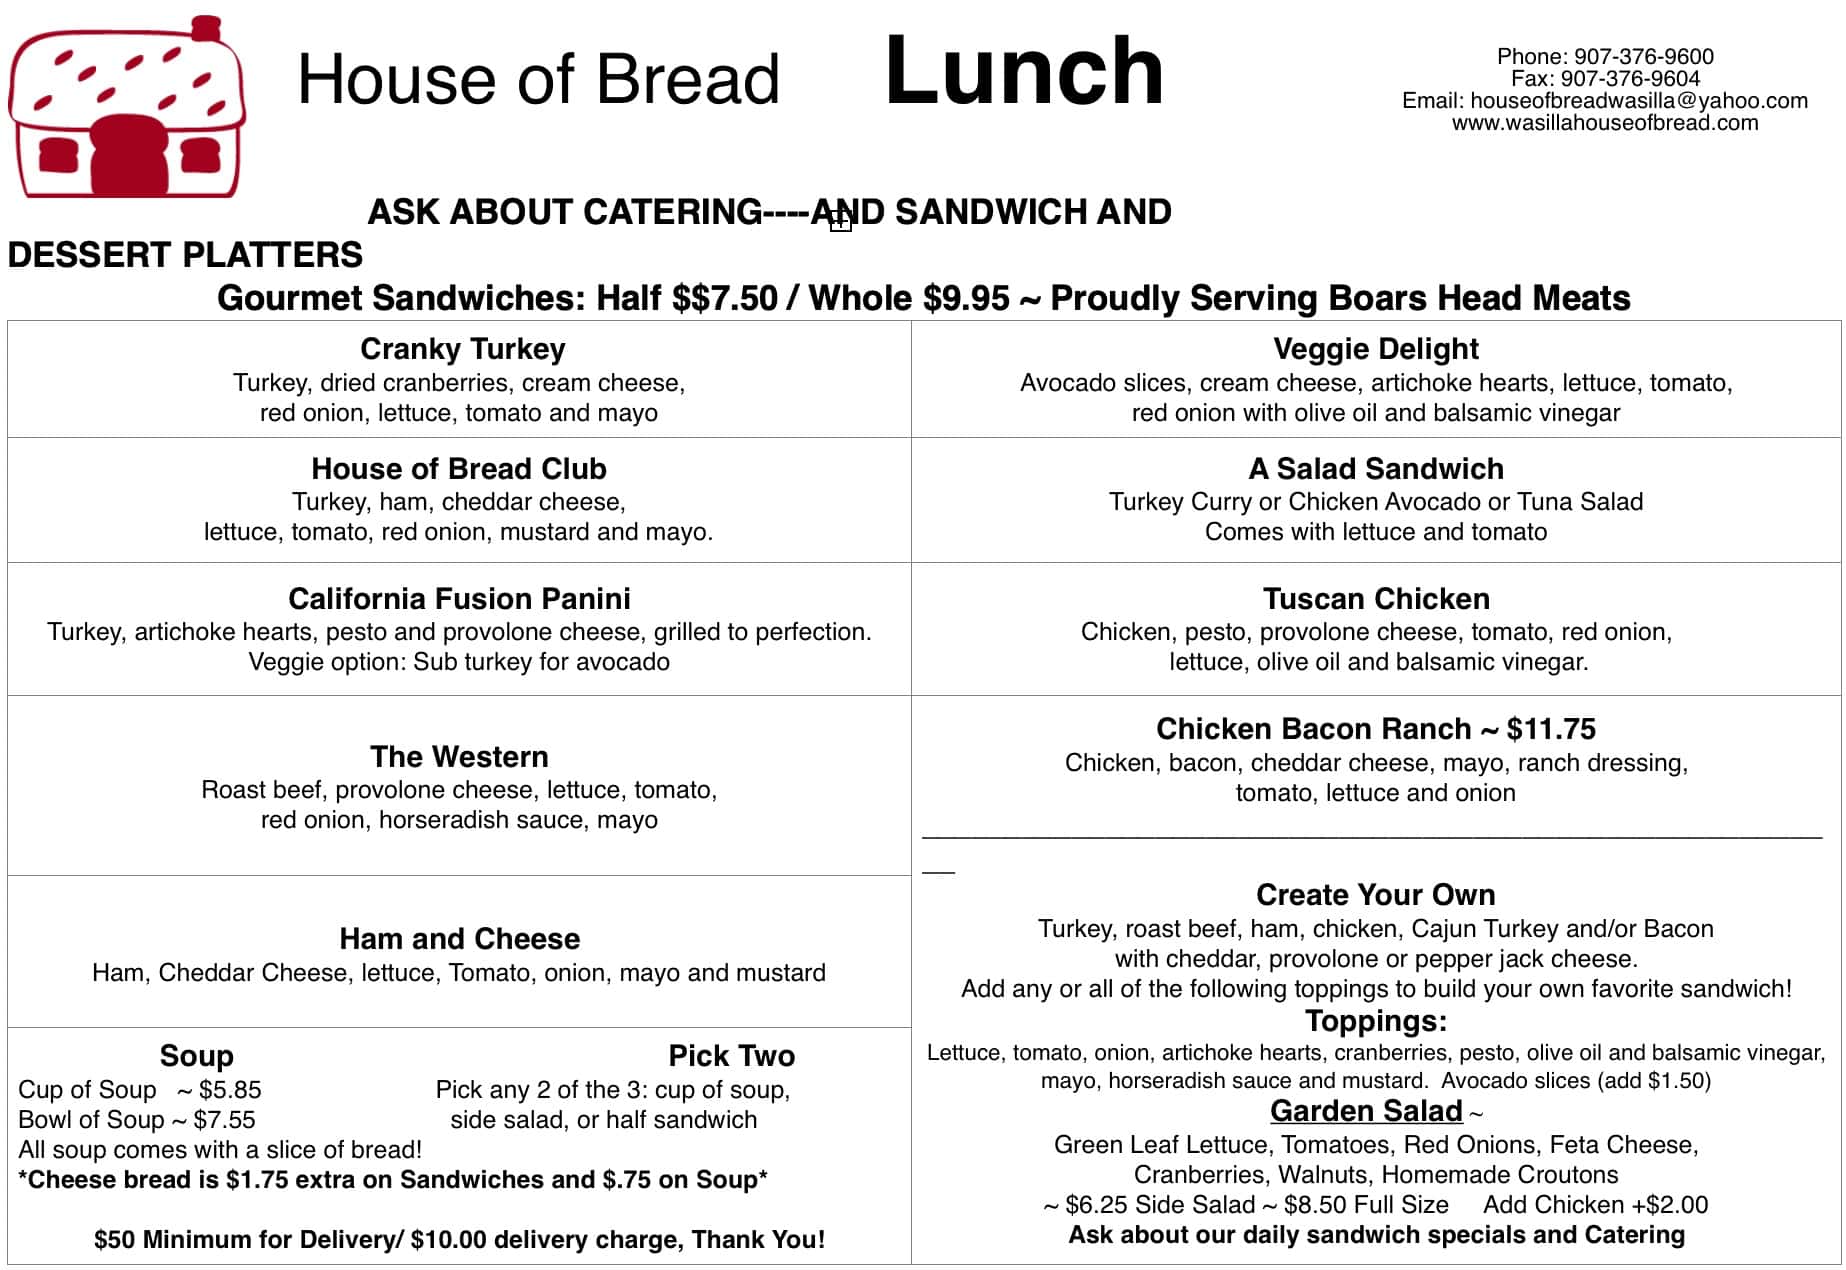 House of Bread Lunch Menu